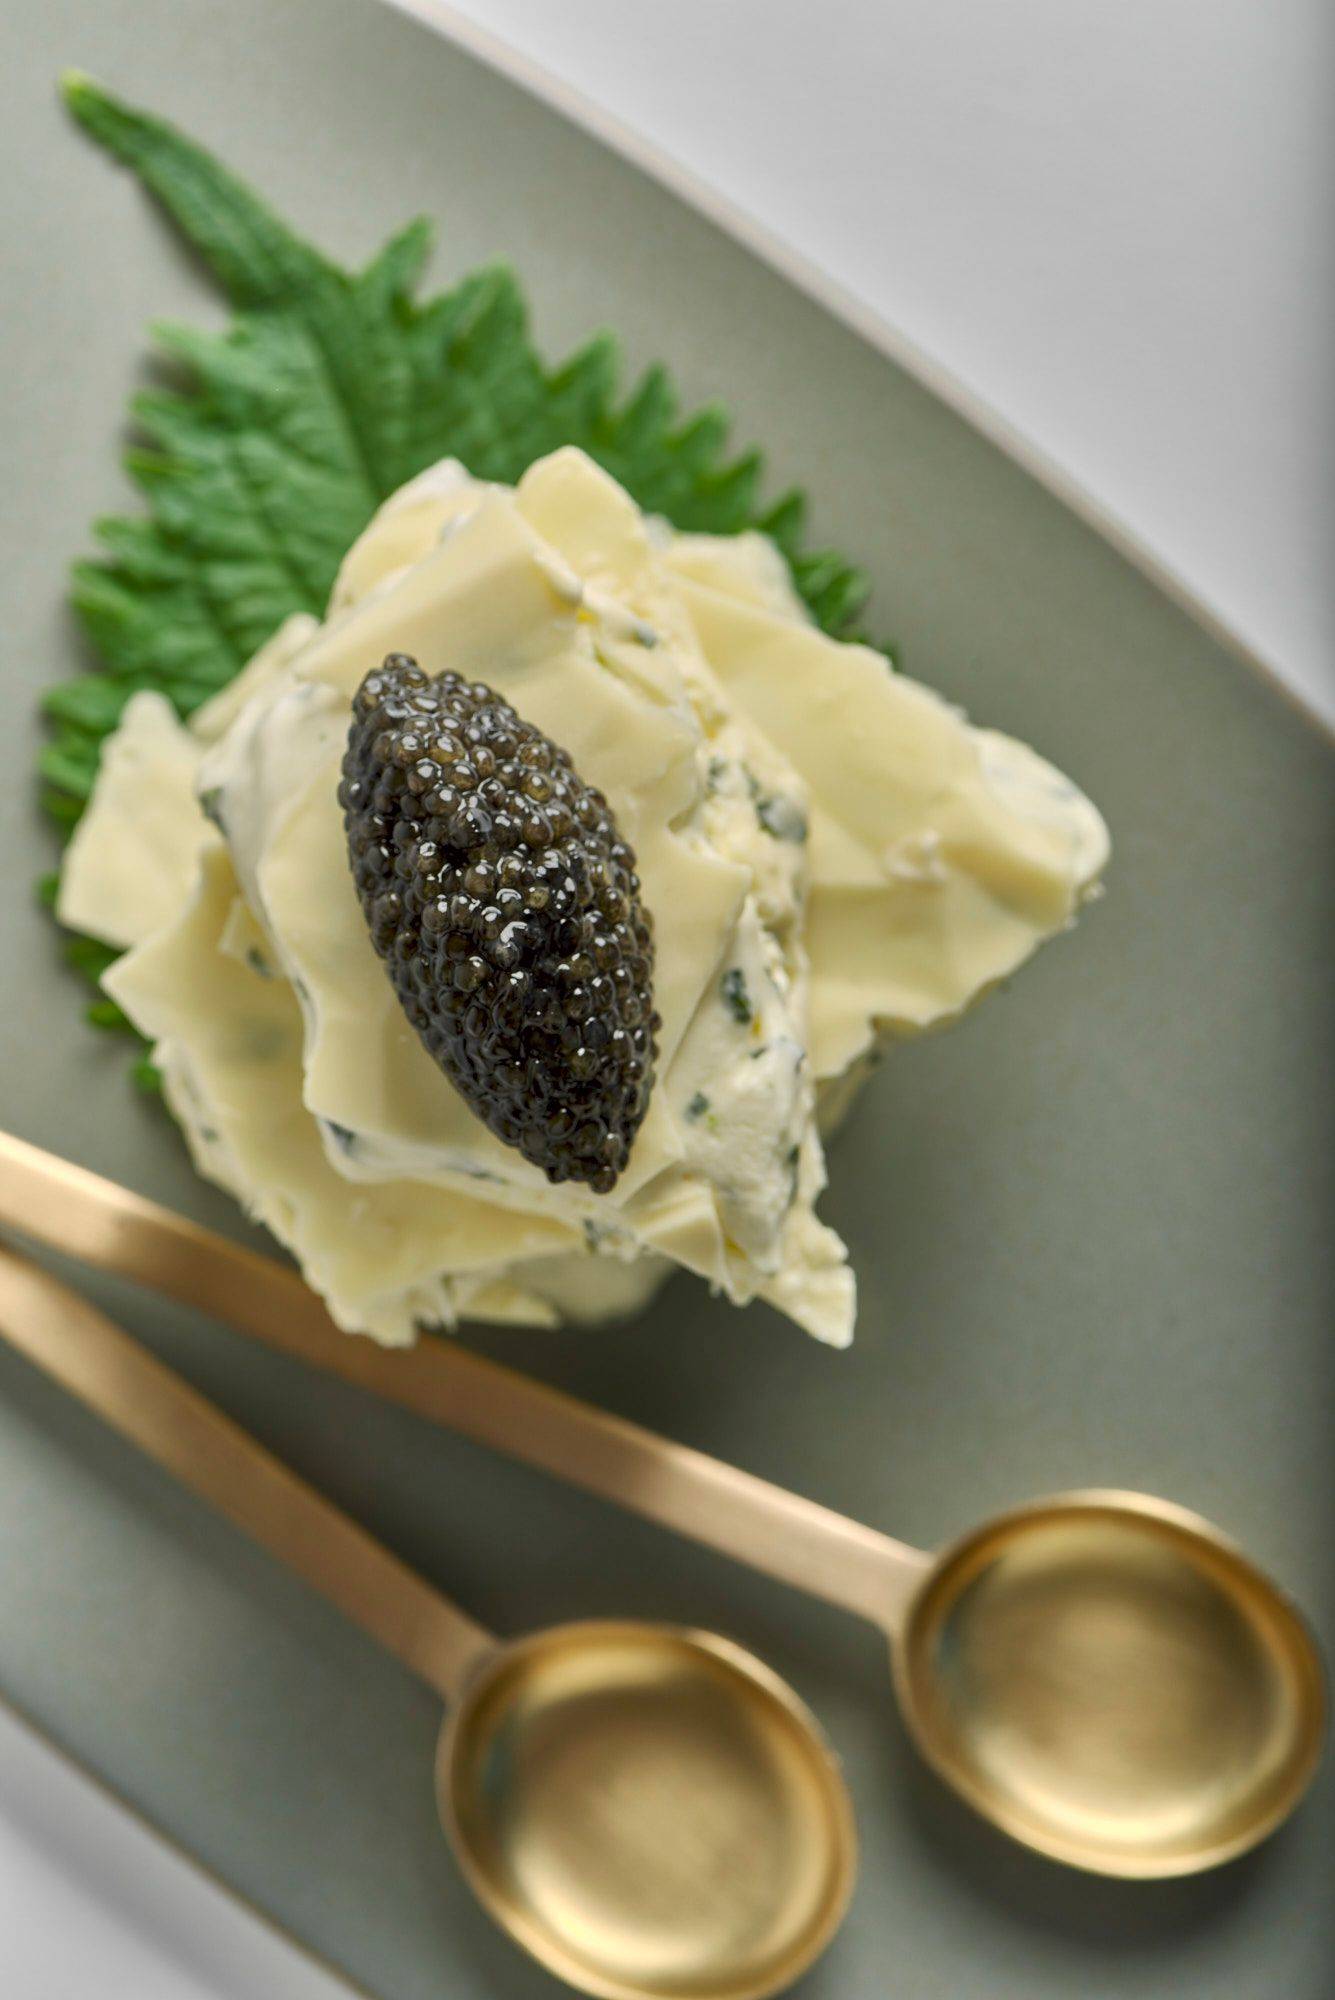 shiso and lime ice cream sandwich with caviar and white chocolate on a gray plate with white background